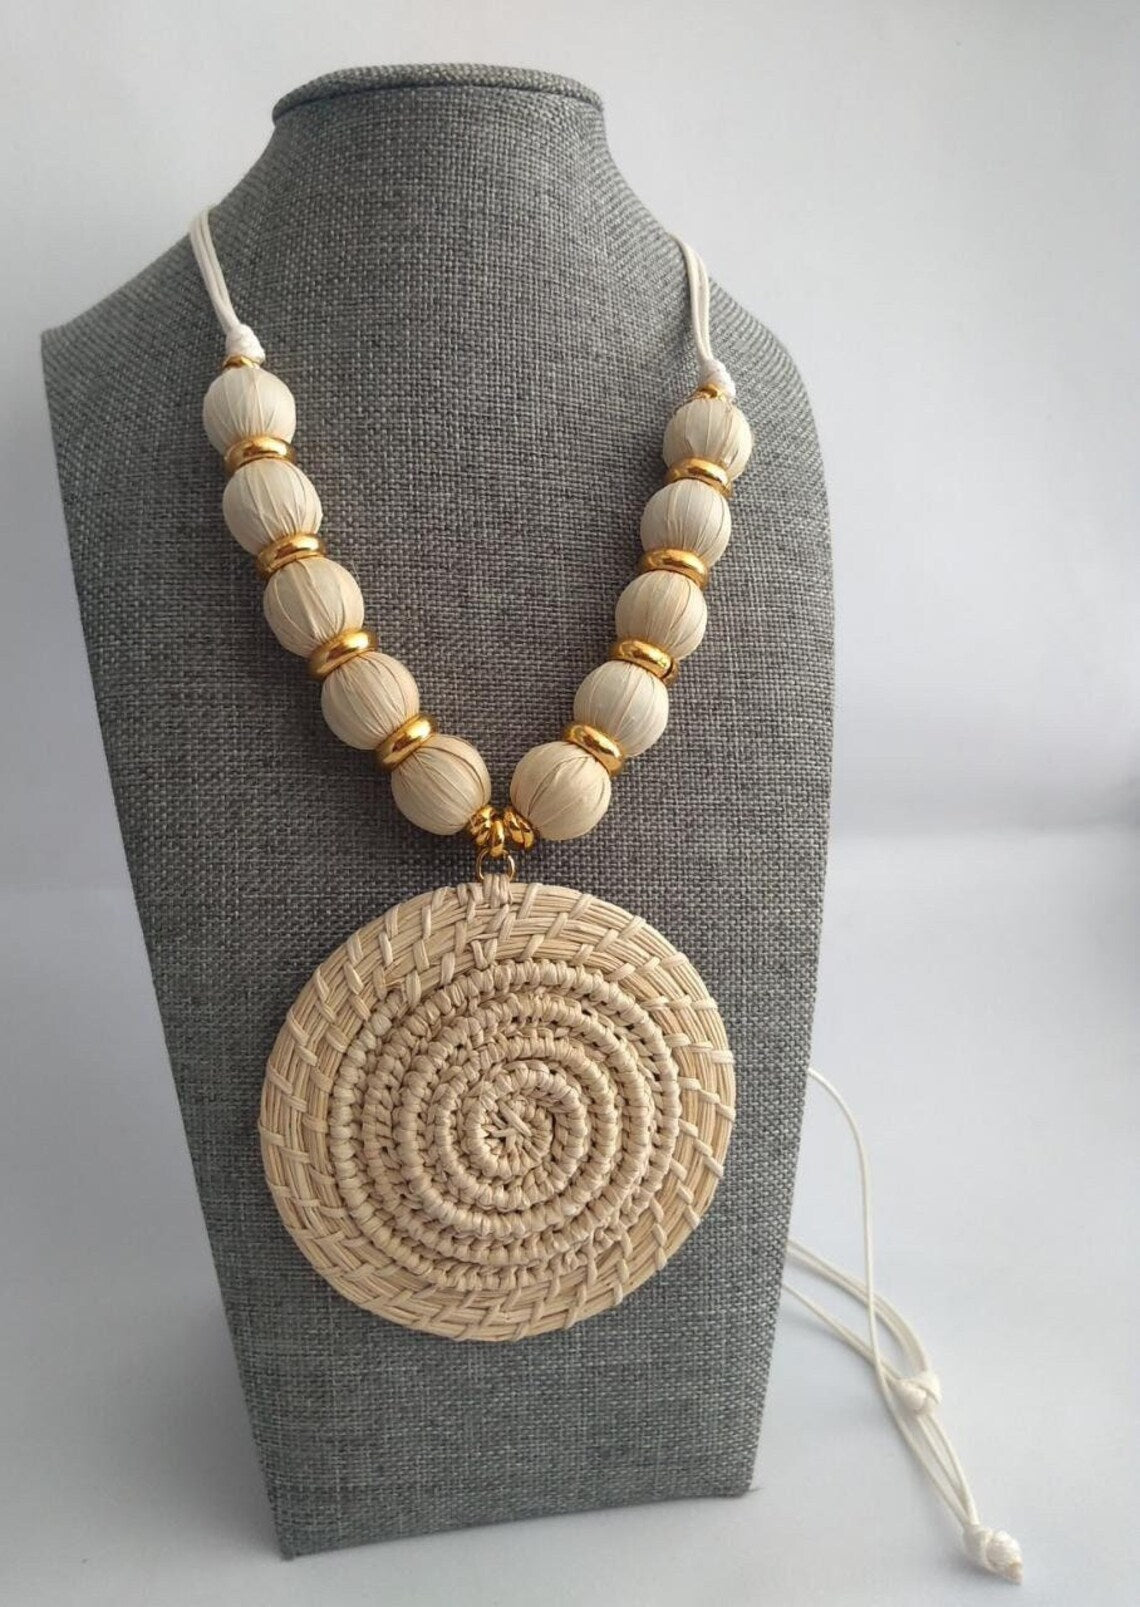 Iraca Palm Pendant Necklace and Earrings Set in White and Beige Color